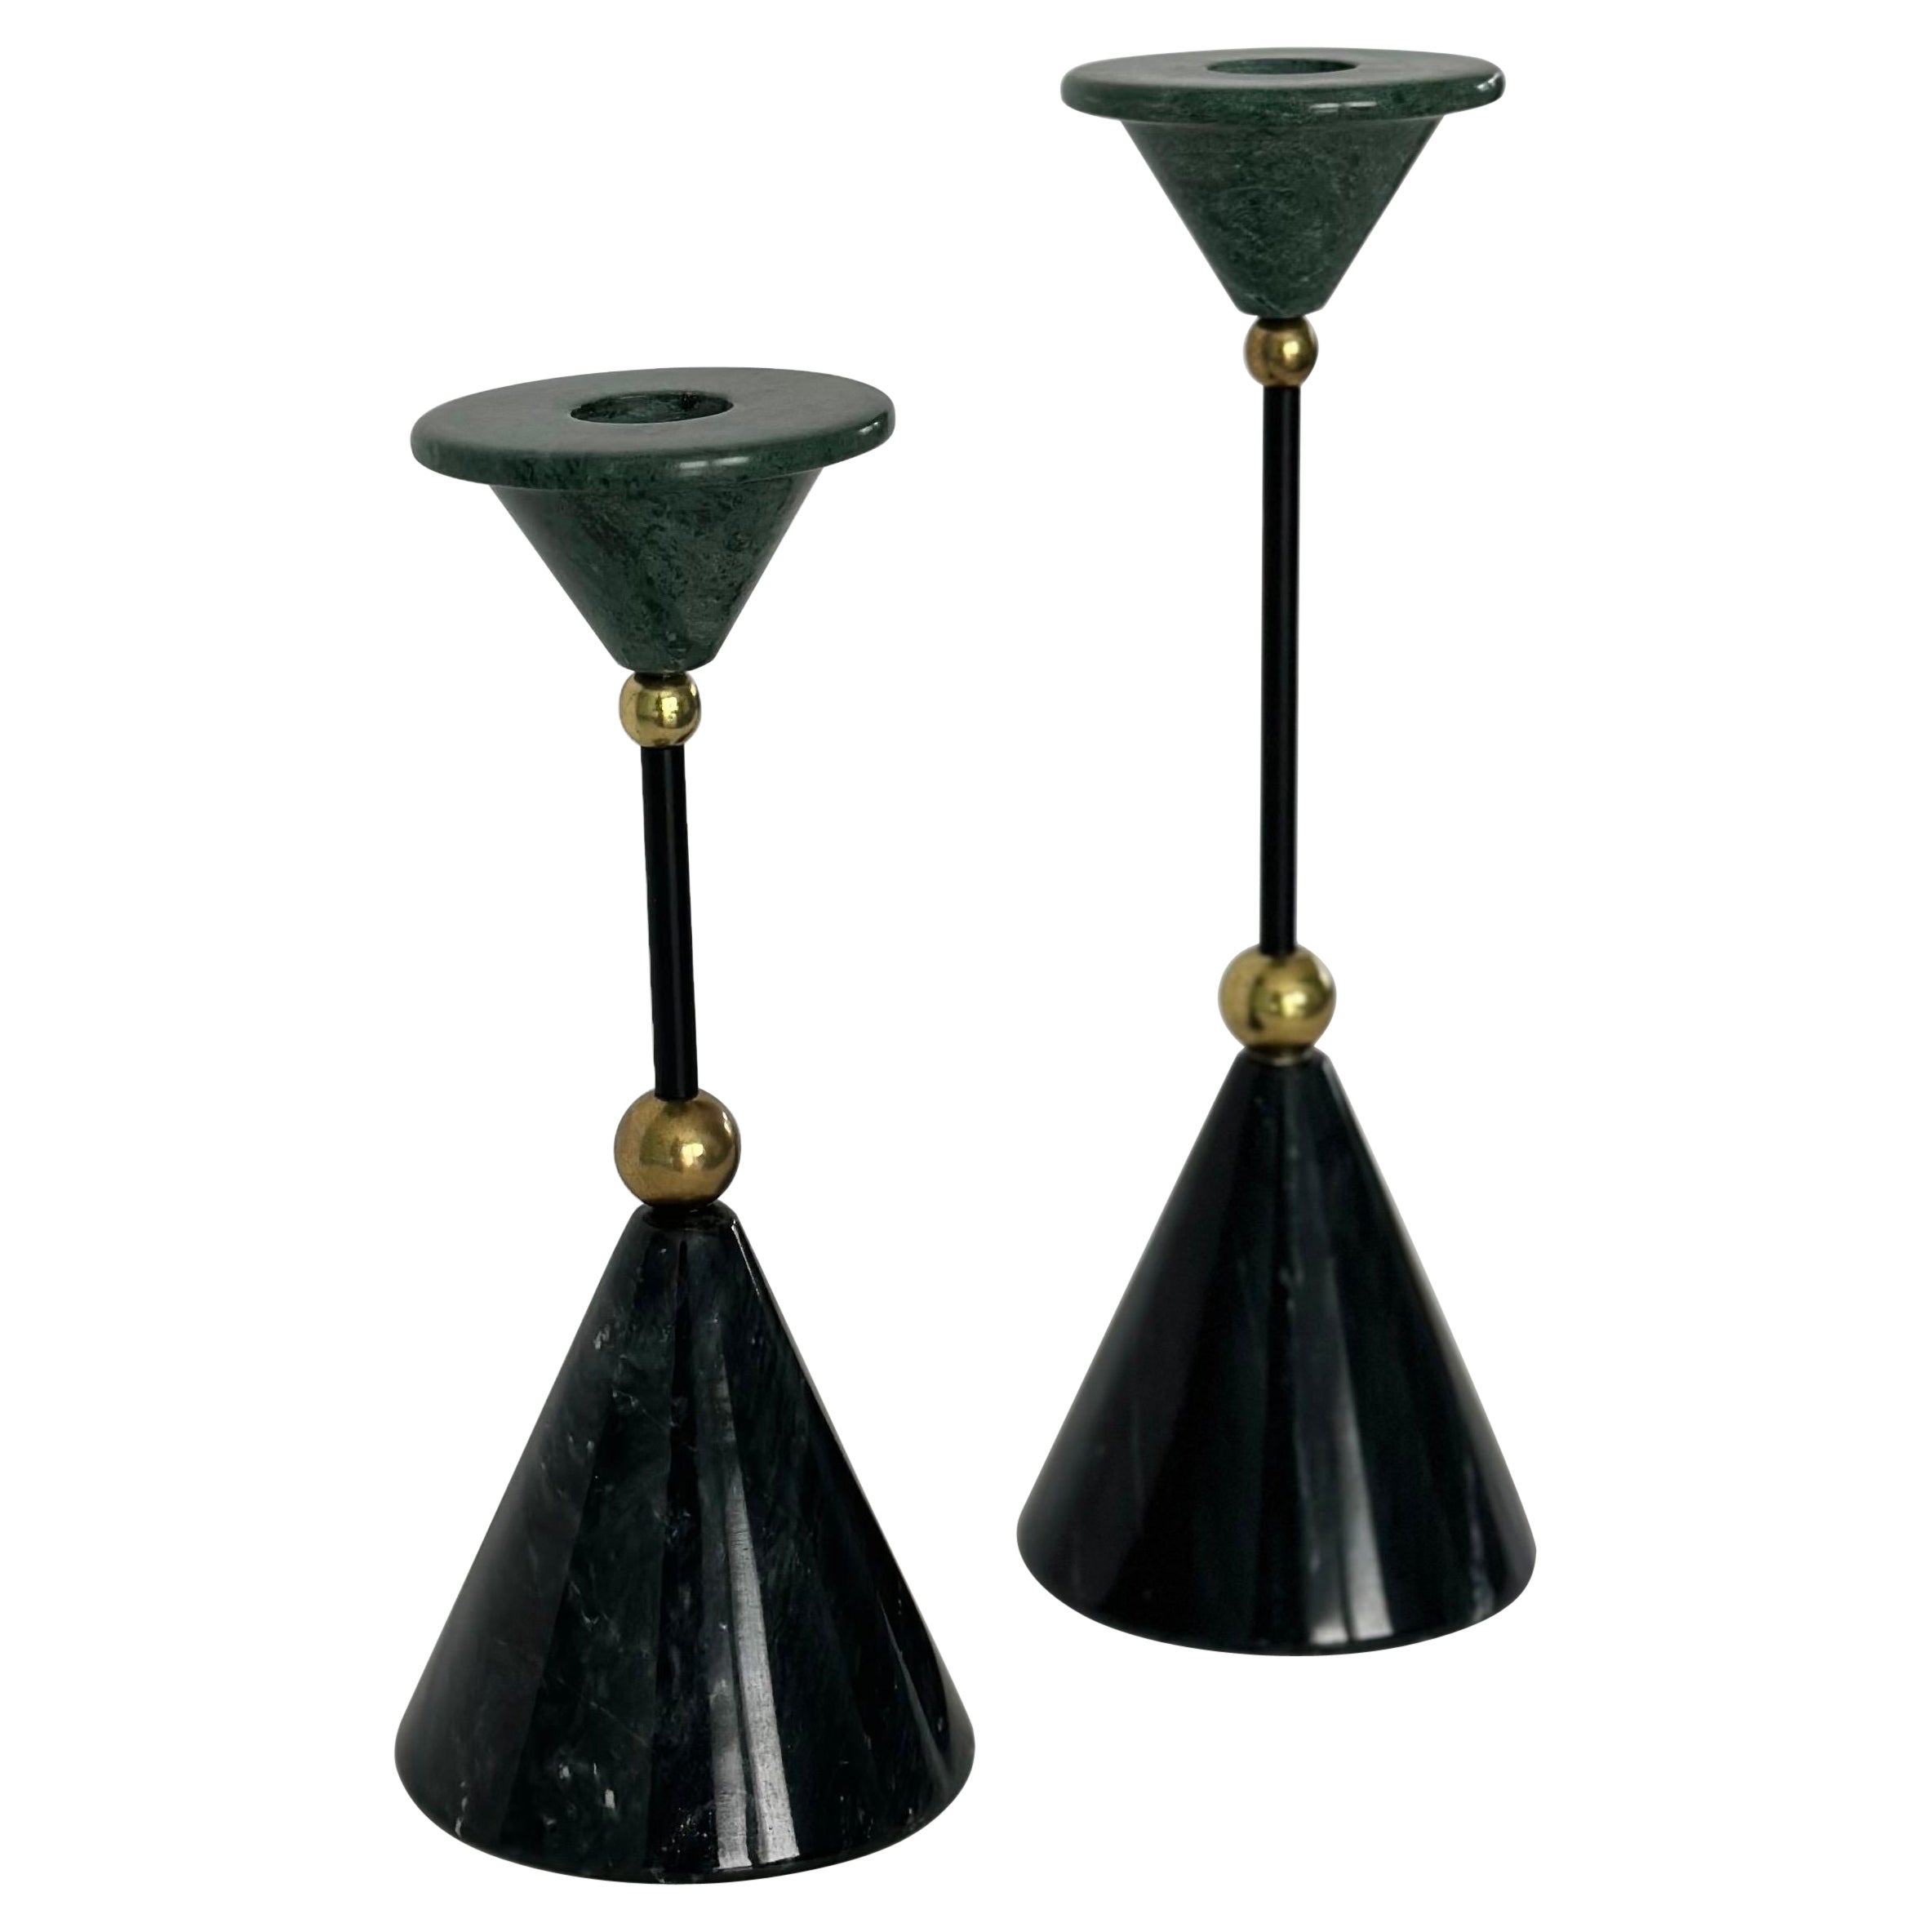 1980s Avant-Garde Black and Green Marble Stone Brass Cones Candlesticks - a Pair For Sale